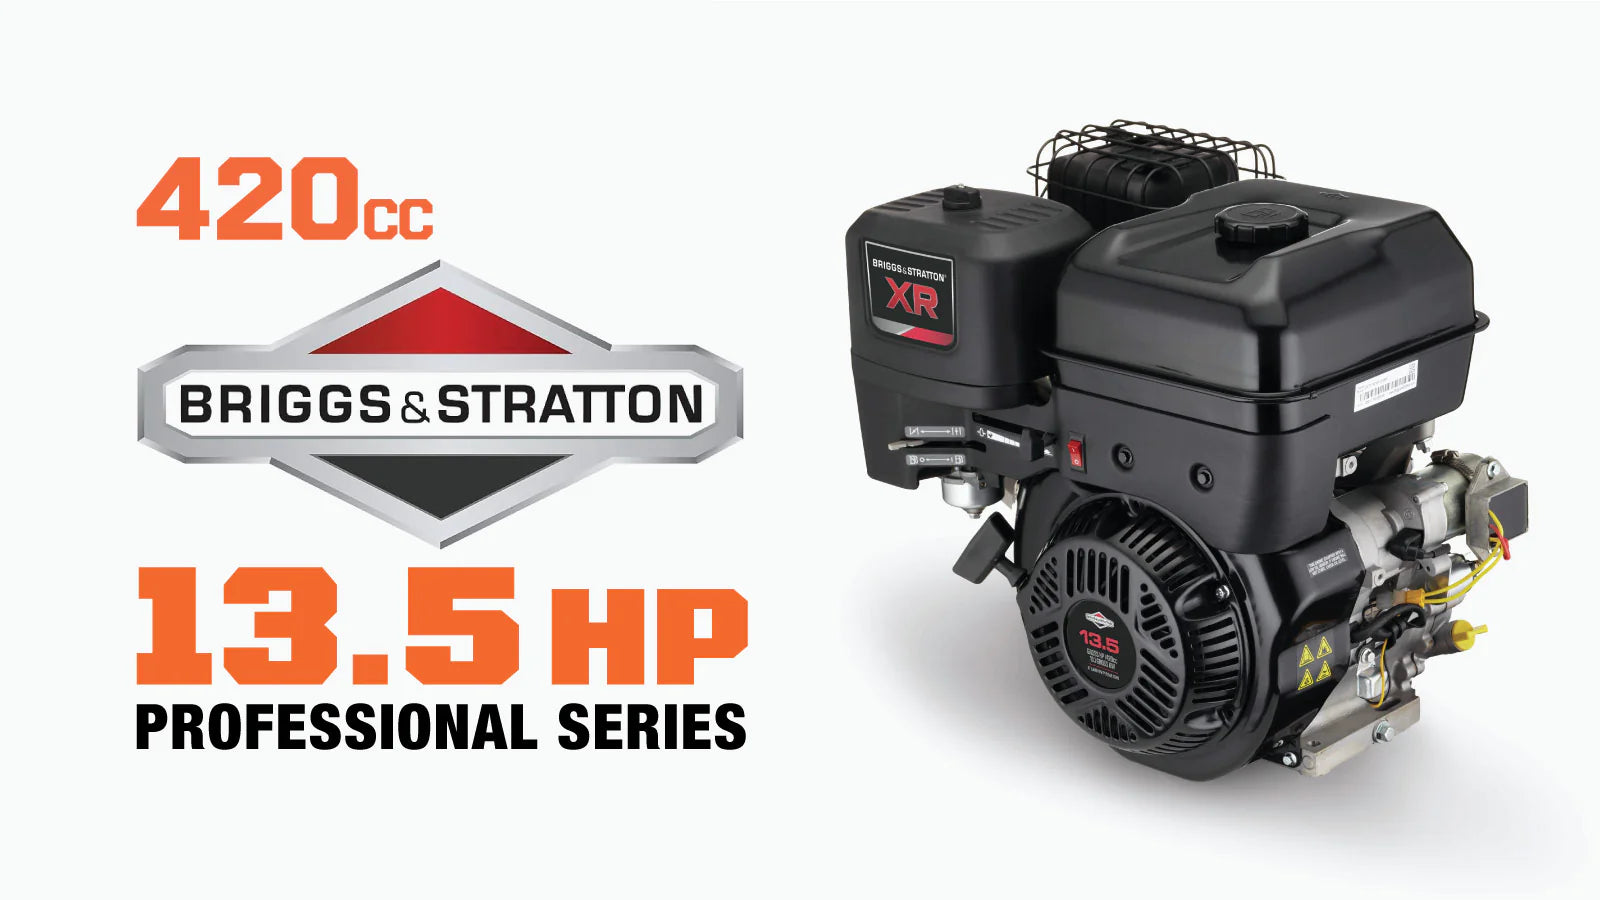 TMG Industrial Briggs & Stratton XR2100 Gas Engine, 13.5 HP, Magnetron® Electronic Ignition, Large Fuel Tank, Dura-Bore™ Cast Iron Sleeve, 21 Ft-Lbs Torque, Recoil Start, EPA Approved, TMG-GEB13-specifications-image